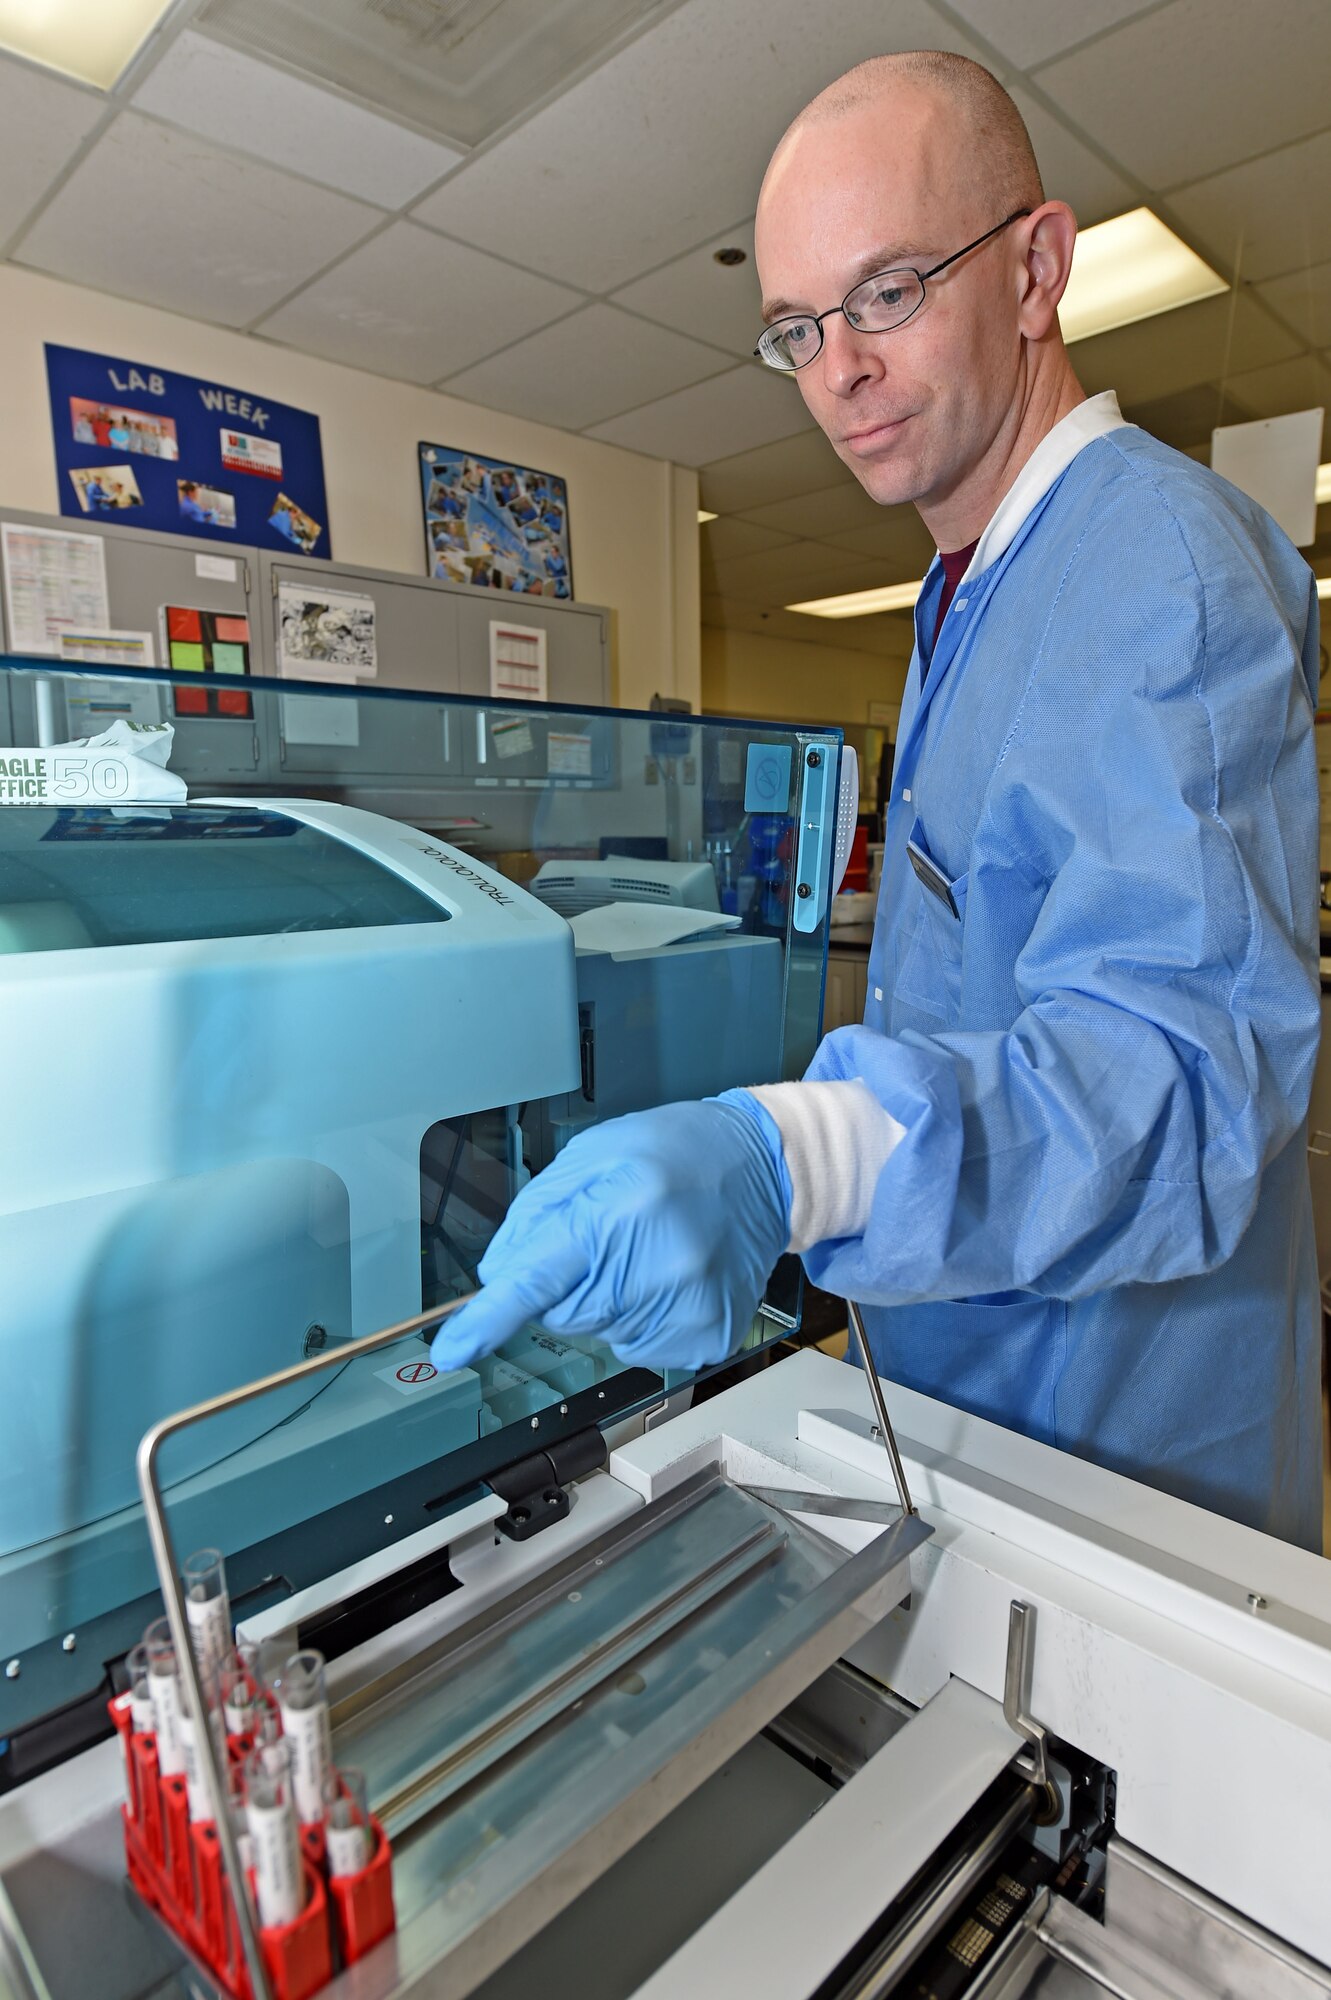 Staff Sgt. Kevin Arnett, 359th Clinical Laboratory and Radiology Flight medical lab technician, loads blood samples in a chemistry analyzer at the 359th Medical Group lab at Joint Base San Antonio-Randolph, Texas, Sept. 16, 2016. The analyzer checks that a patient’s body and organs are functioning properly. (U.S. Air Force photo/Tech. Sgt. Christopher Carwile/Released).